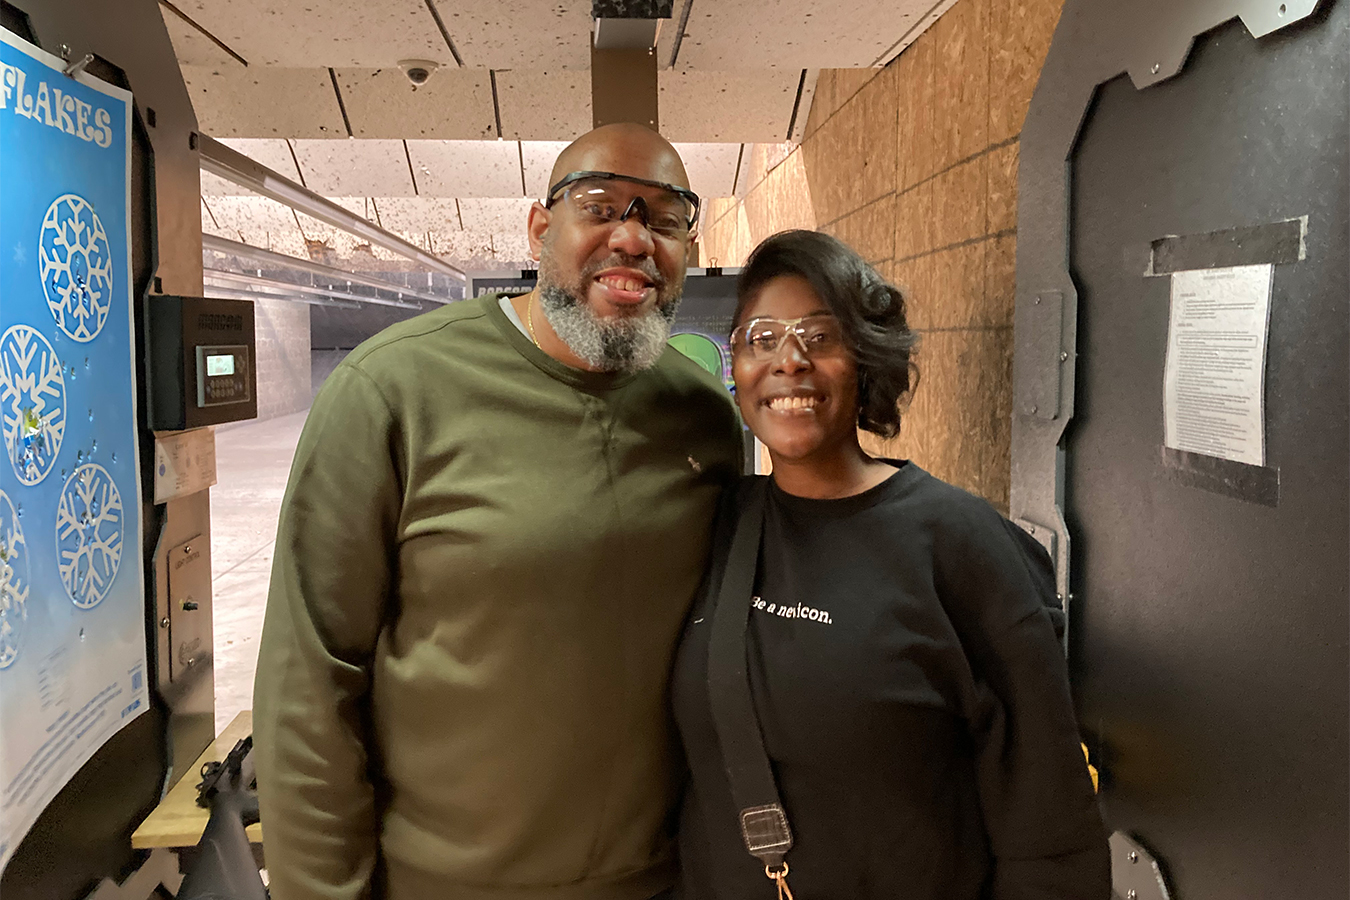 Sharis and Russell Lewis pose for a photo together at the gun range, standing next to each other, smiling. They are both seen wearing protective glasses.